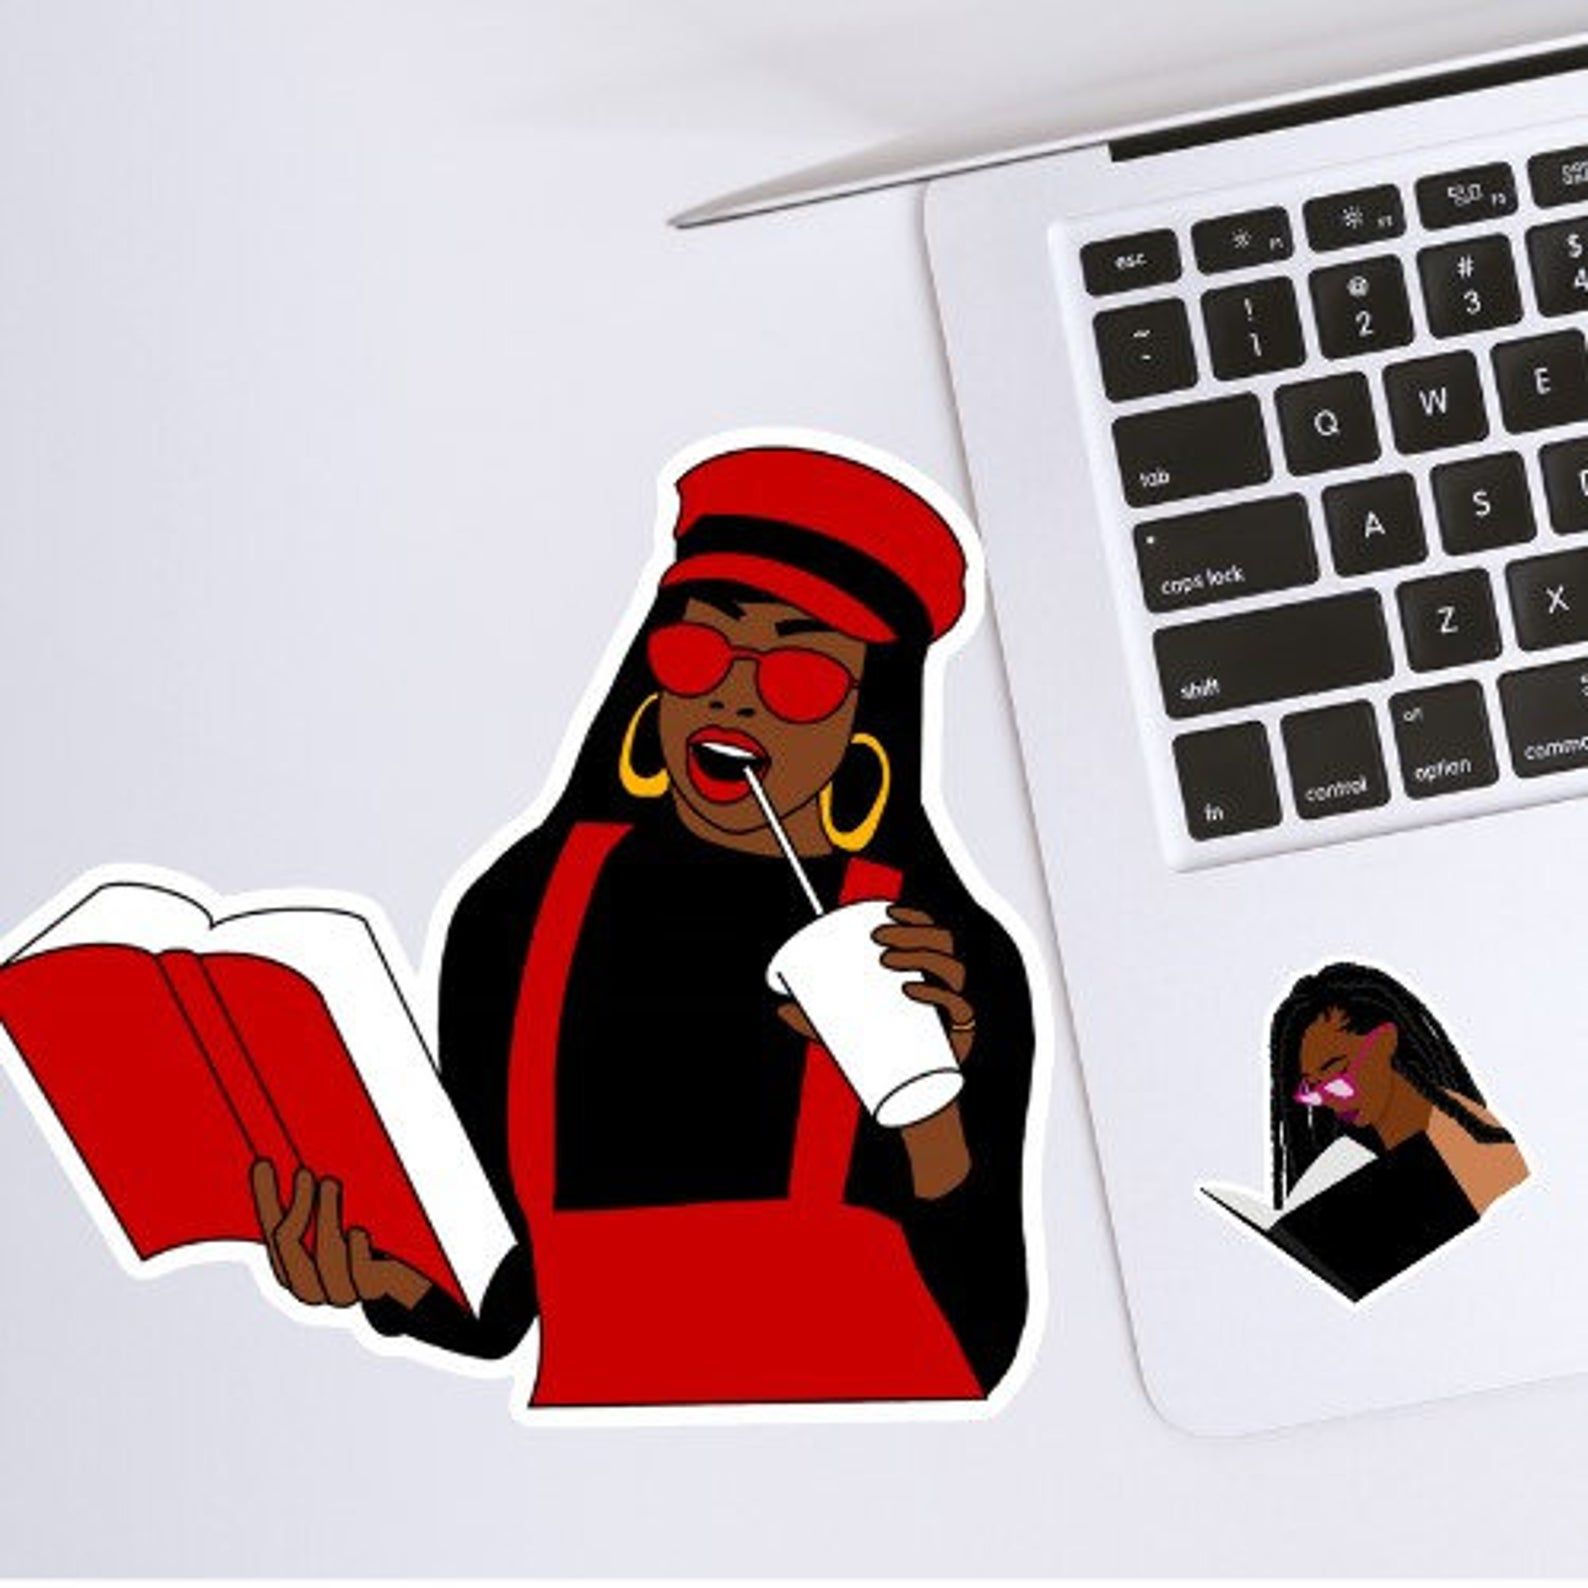 Picture of a vinyl sticker next to a silver laptop. The sticker is of a stylish Black woman with long hair. She is wearing a red hat, a black shirt and red jumper, red sunglasses, red lipstick, and gold hoops. She's reading a red book and drinking from a white cup with a straw.